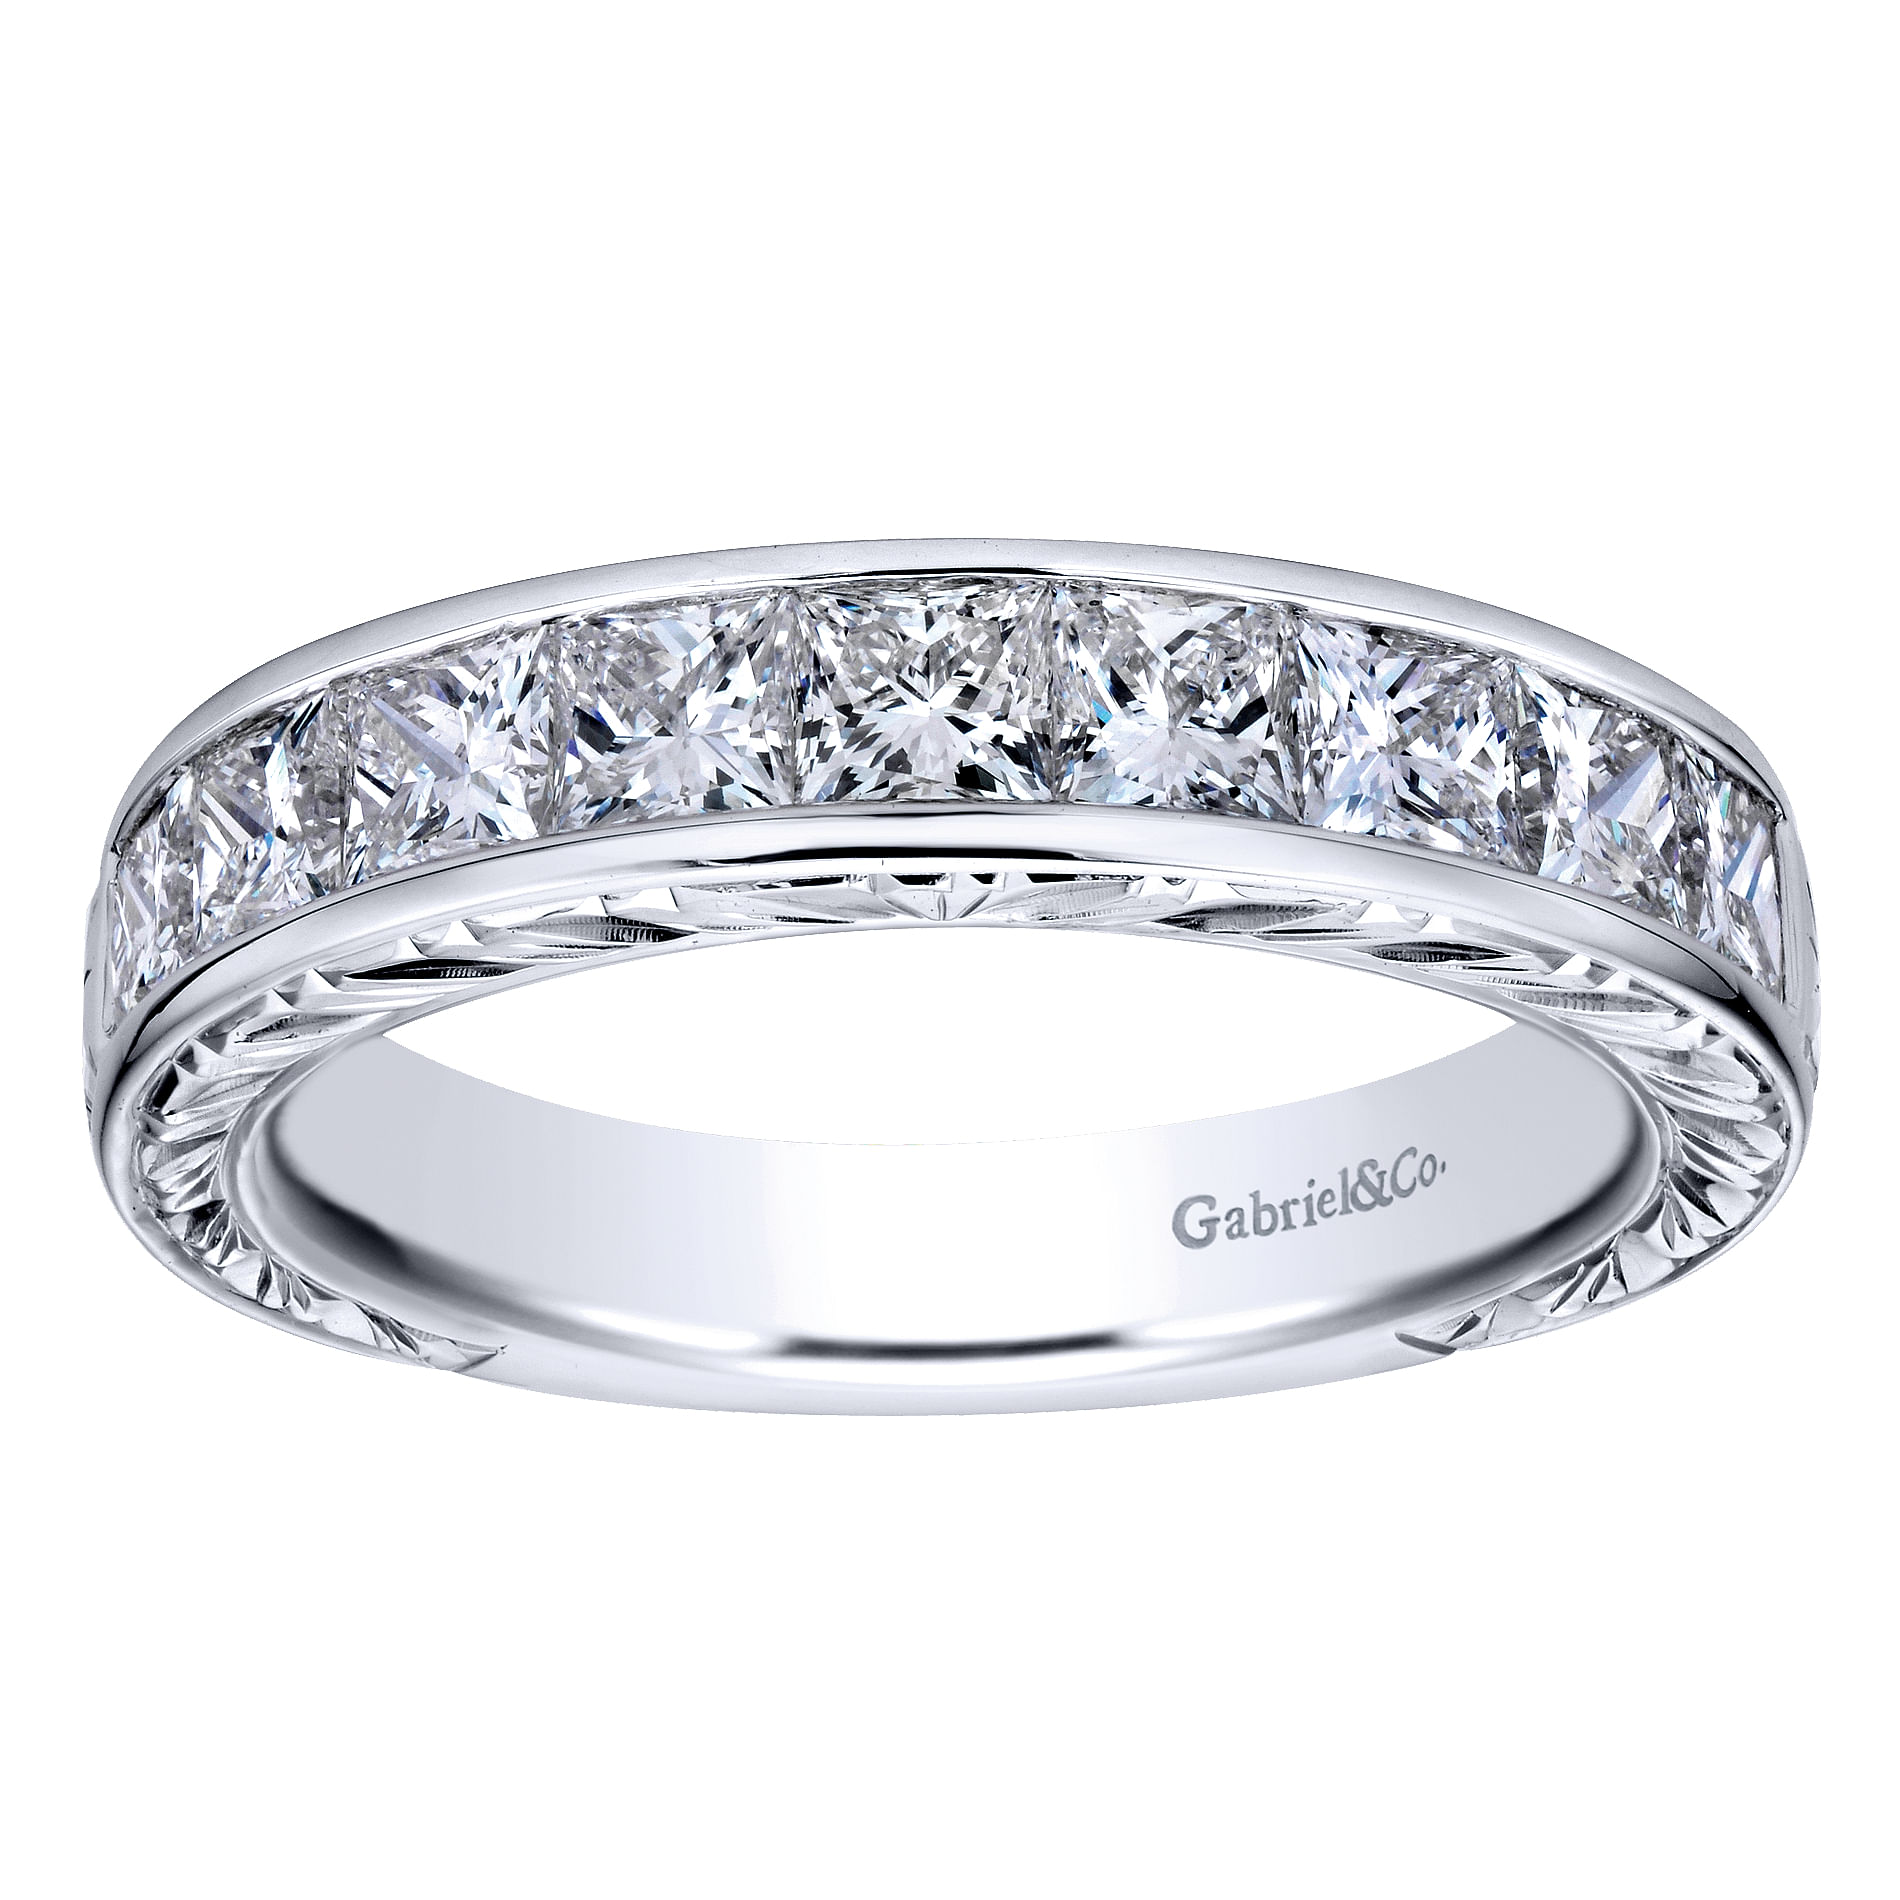 Cesaire - 14K White Gold Princess Cut 9 Stone Channel Set Diamond Wedding Band with Engraving - 1.5 ct - Shot 4